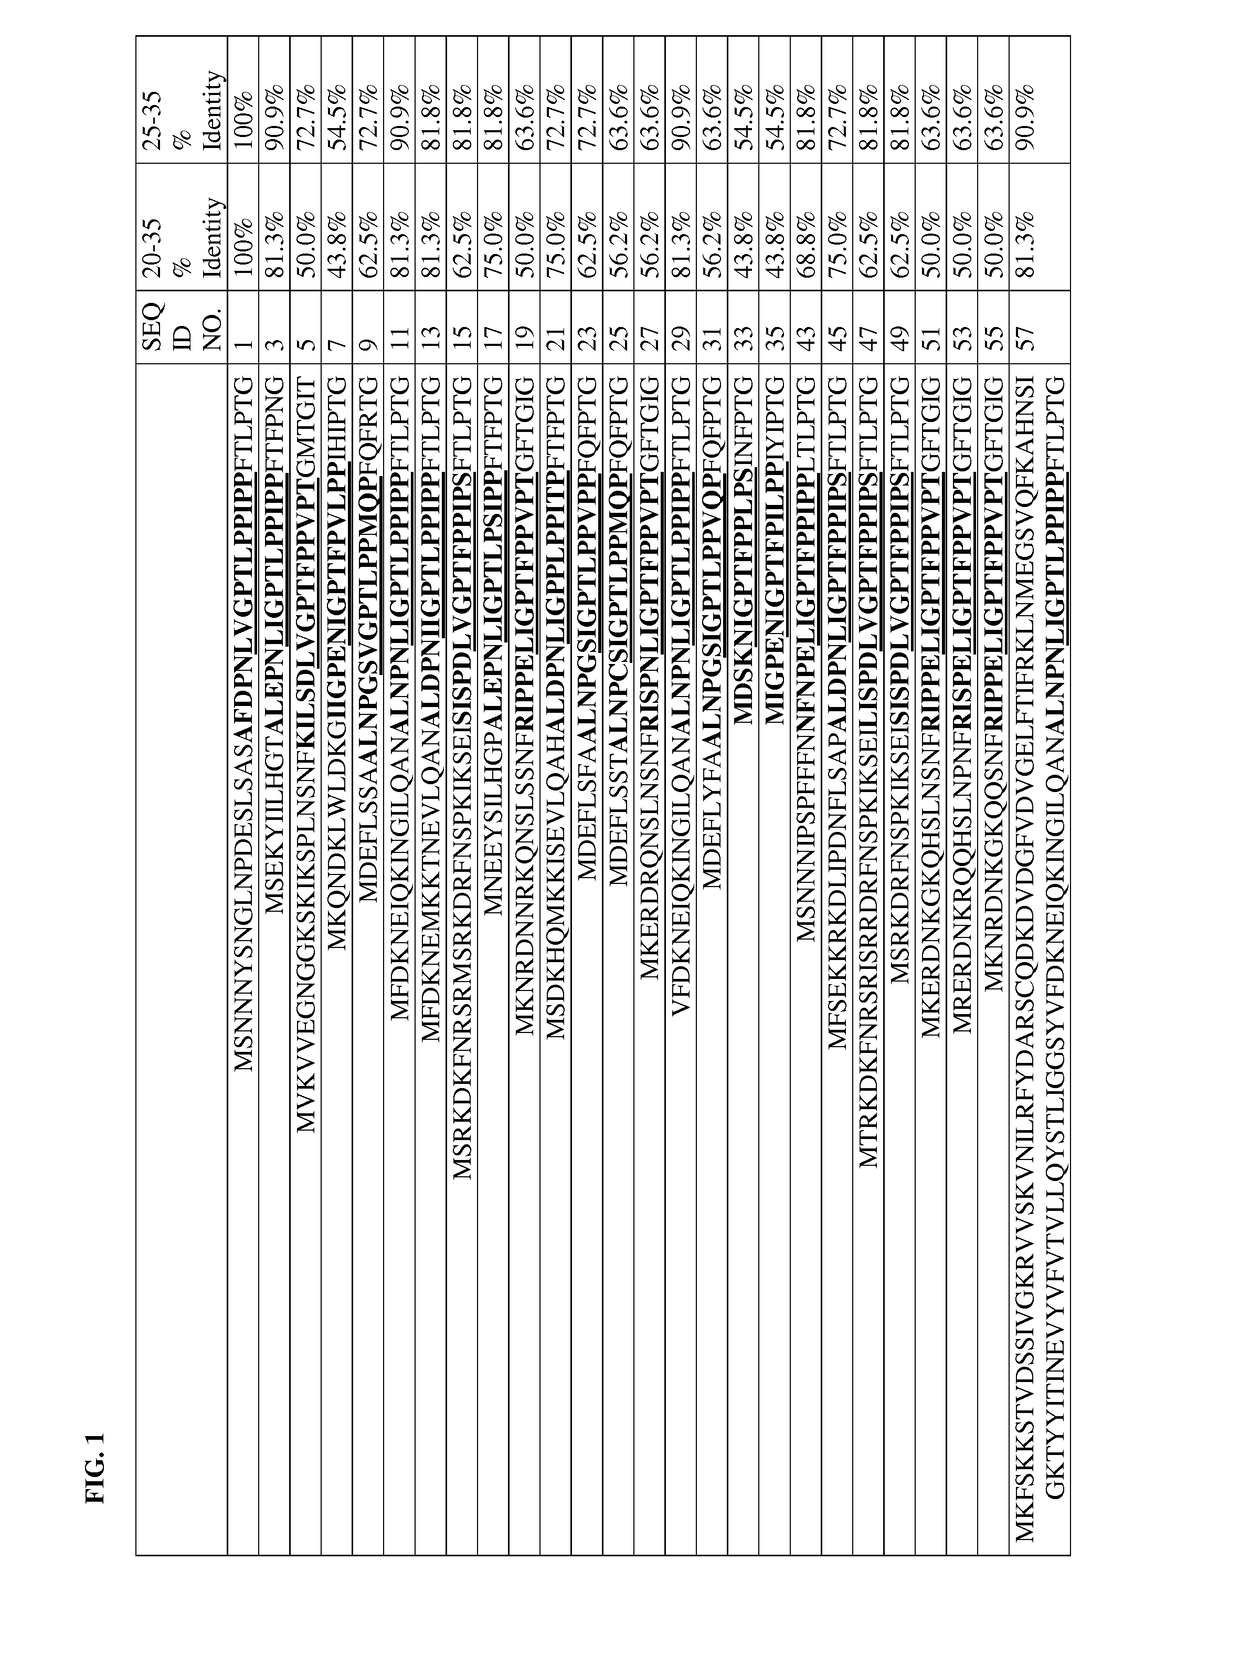 Compositions comprising recombinant bacillus cells and a fungicide